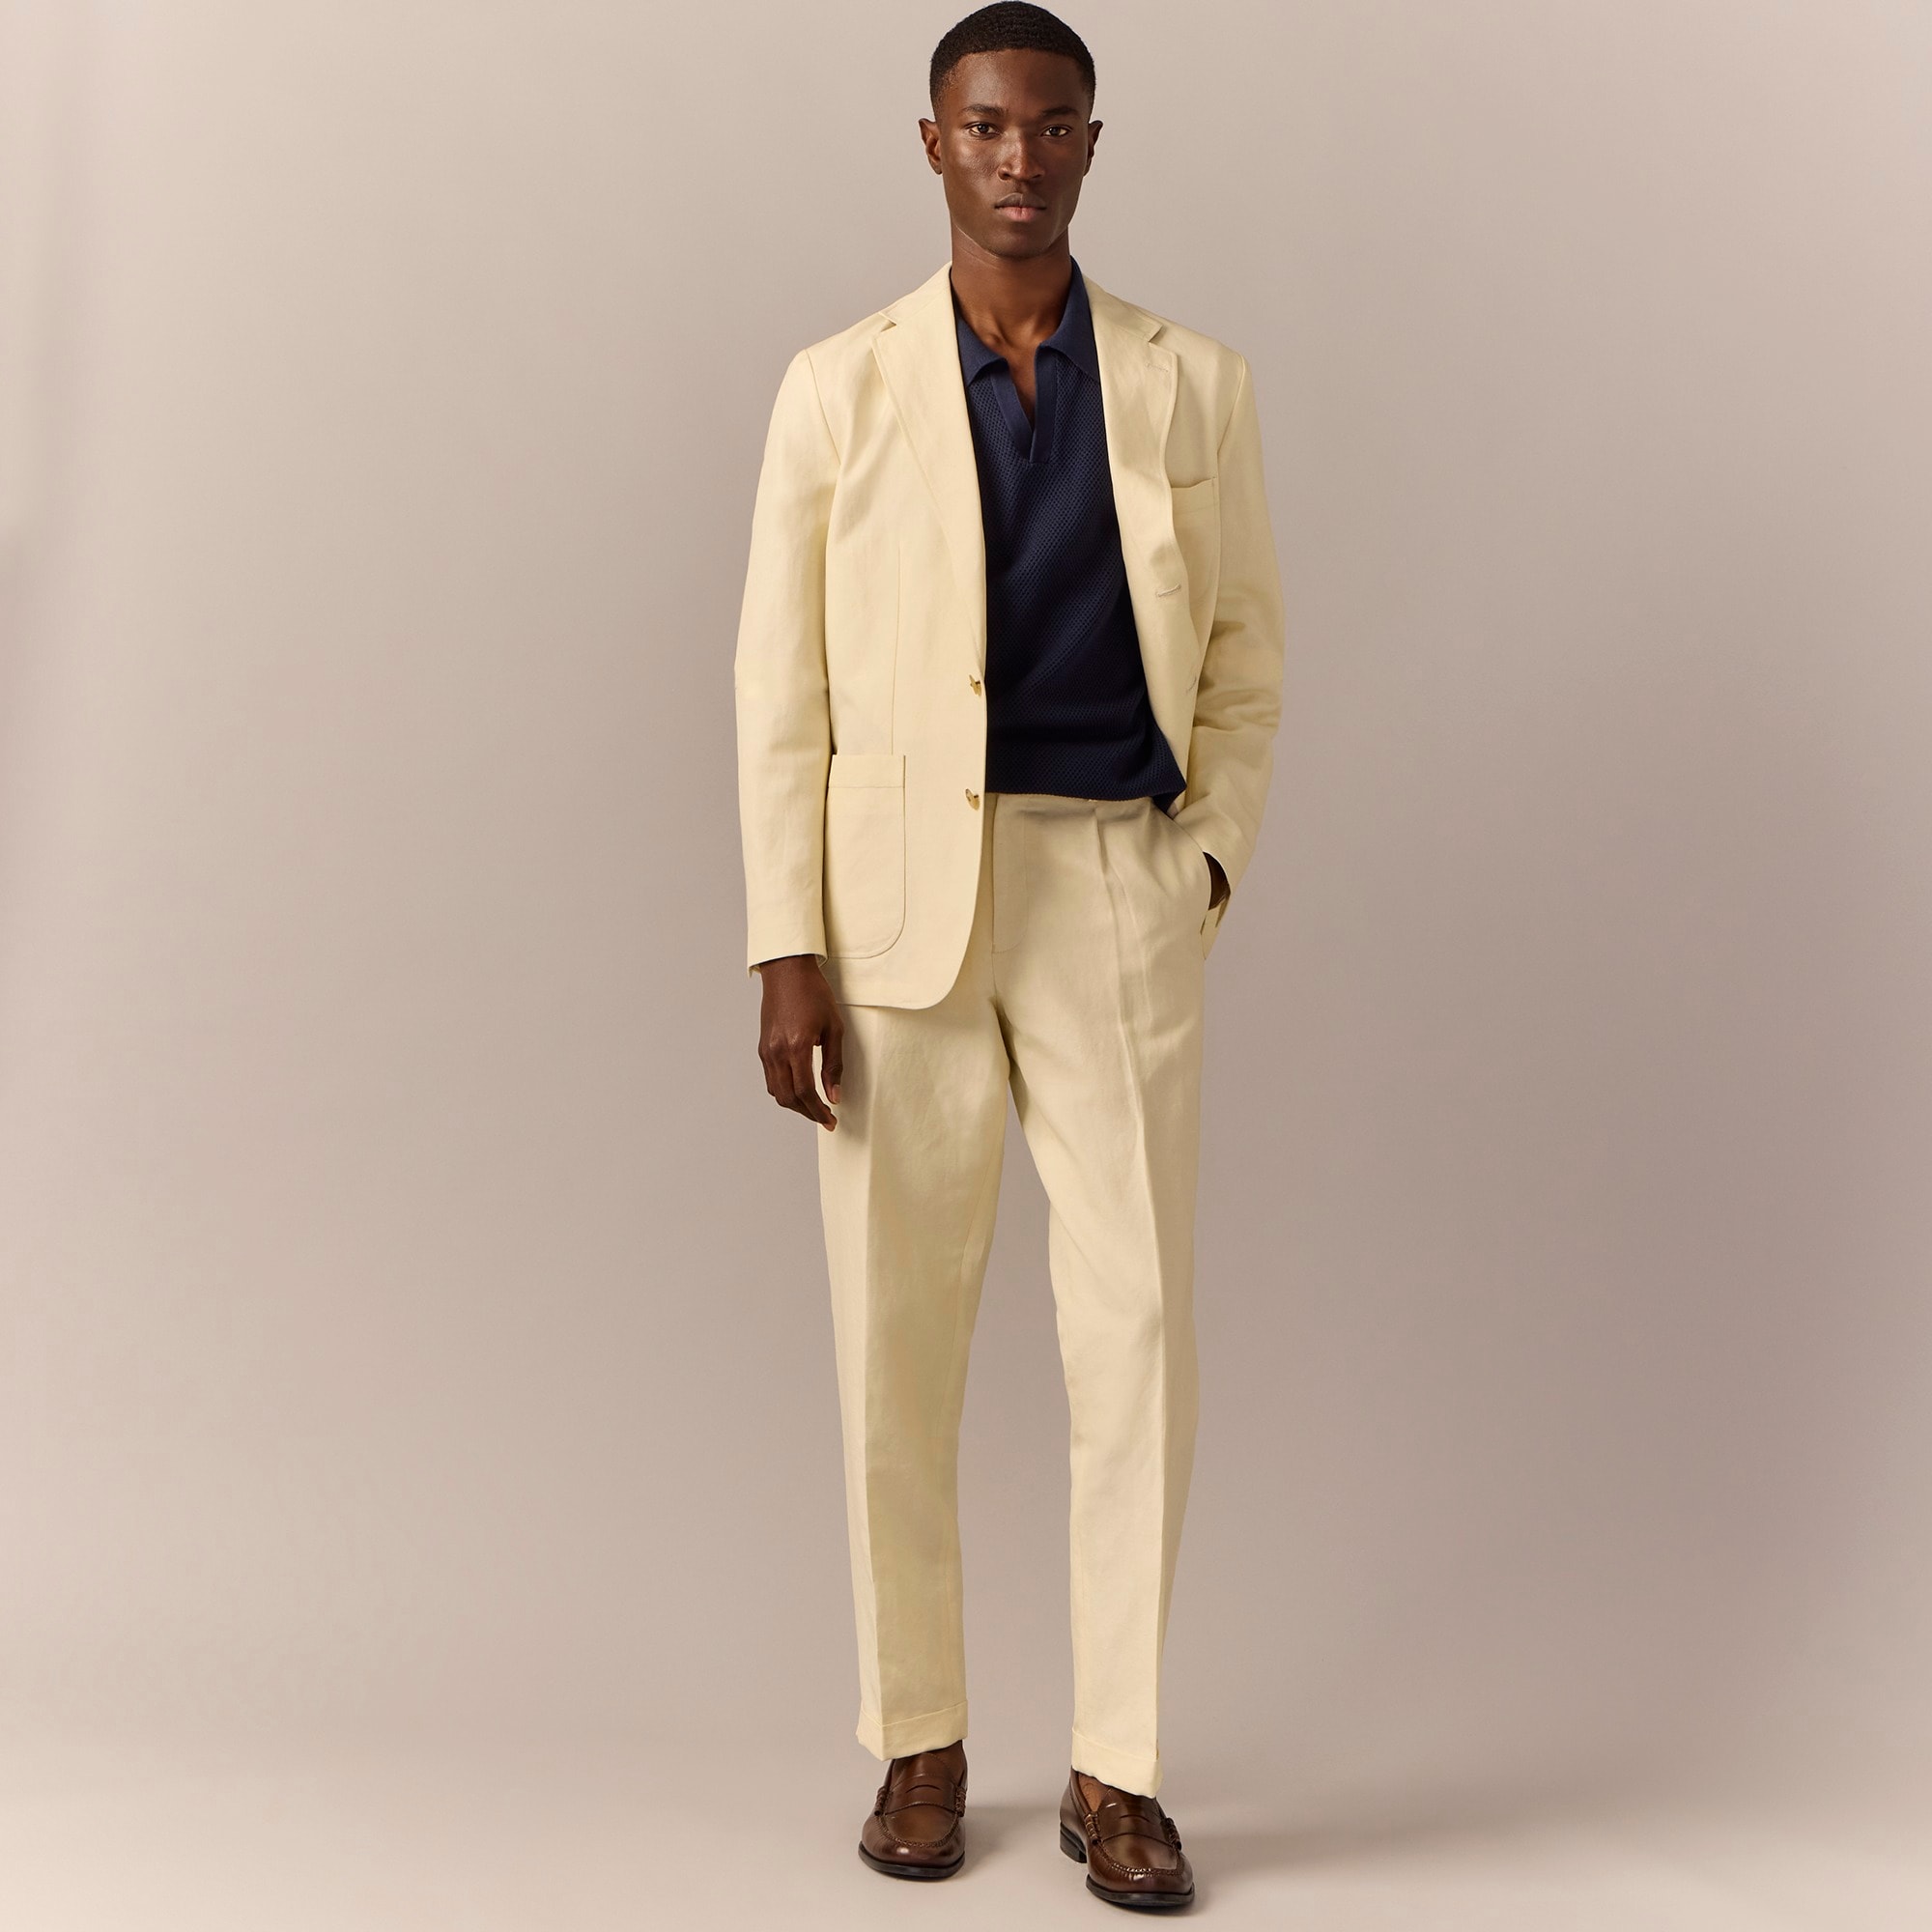 mens Crosby Classic-fit suit jacket in Italian linen-cotton blend